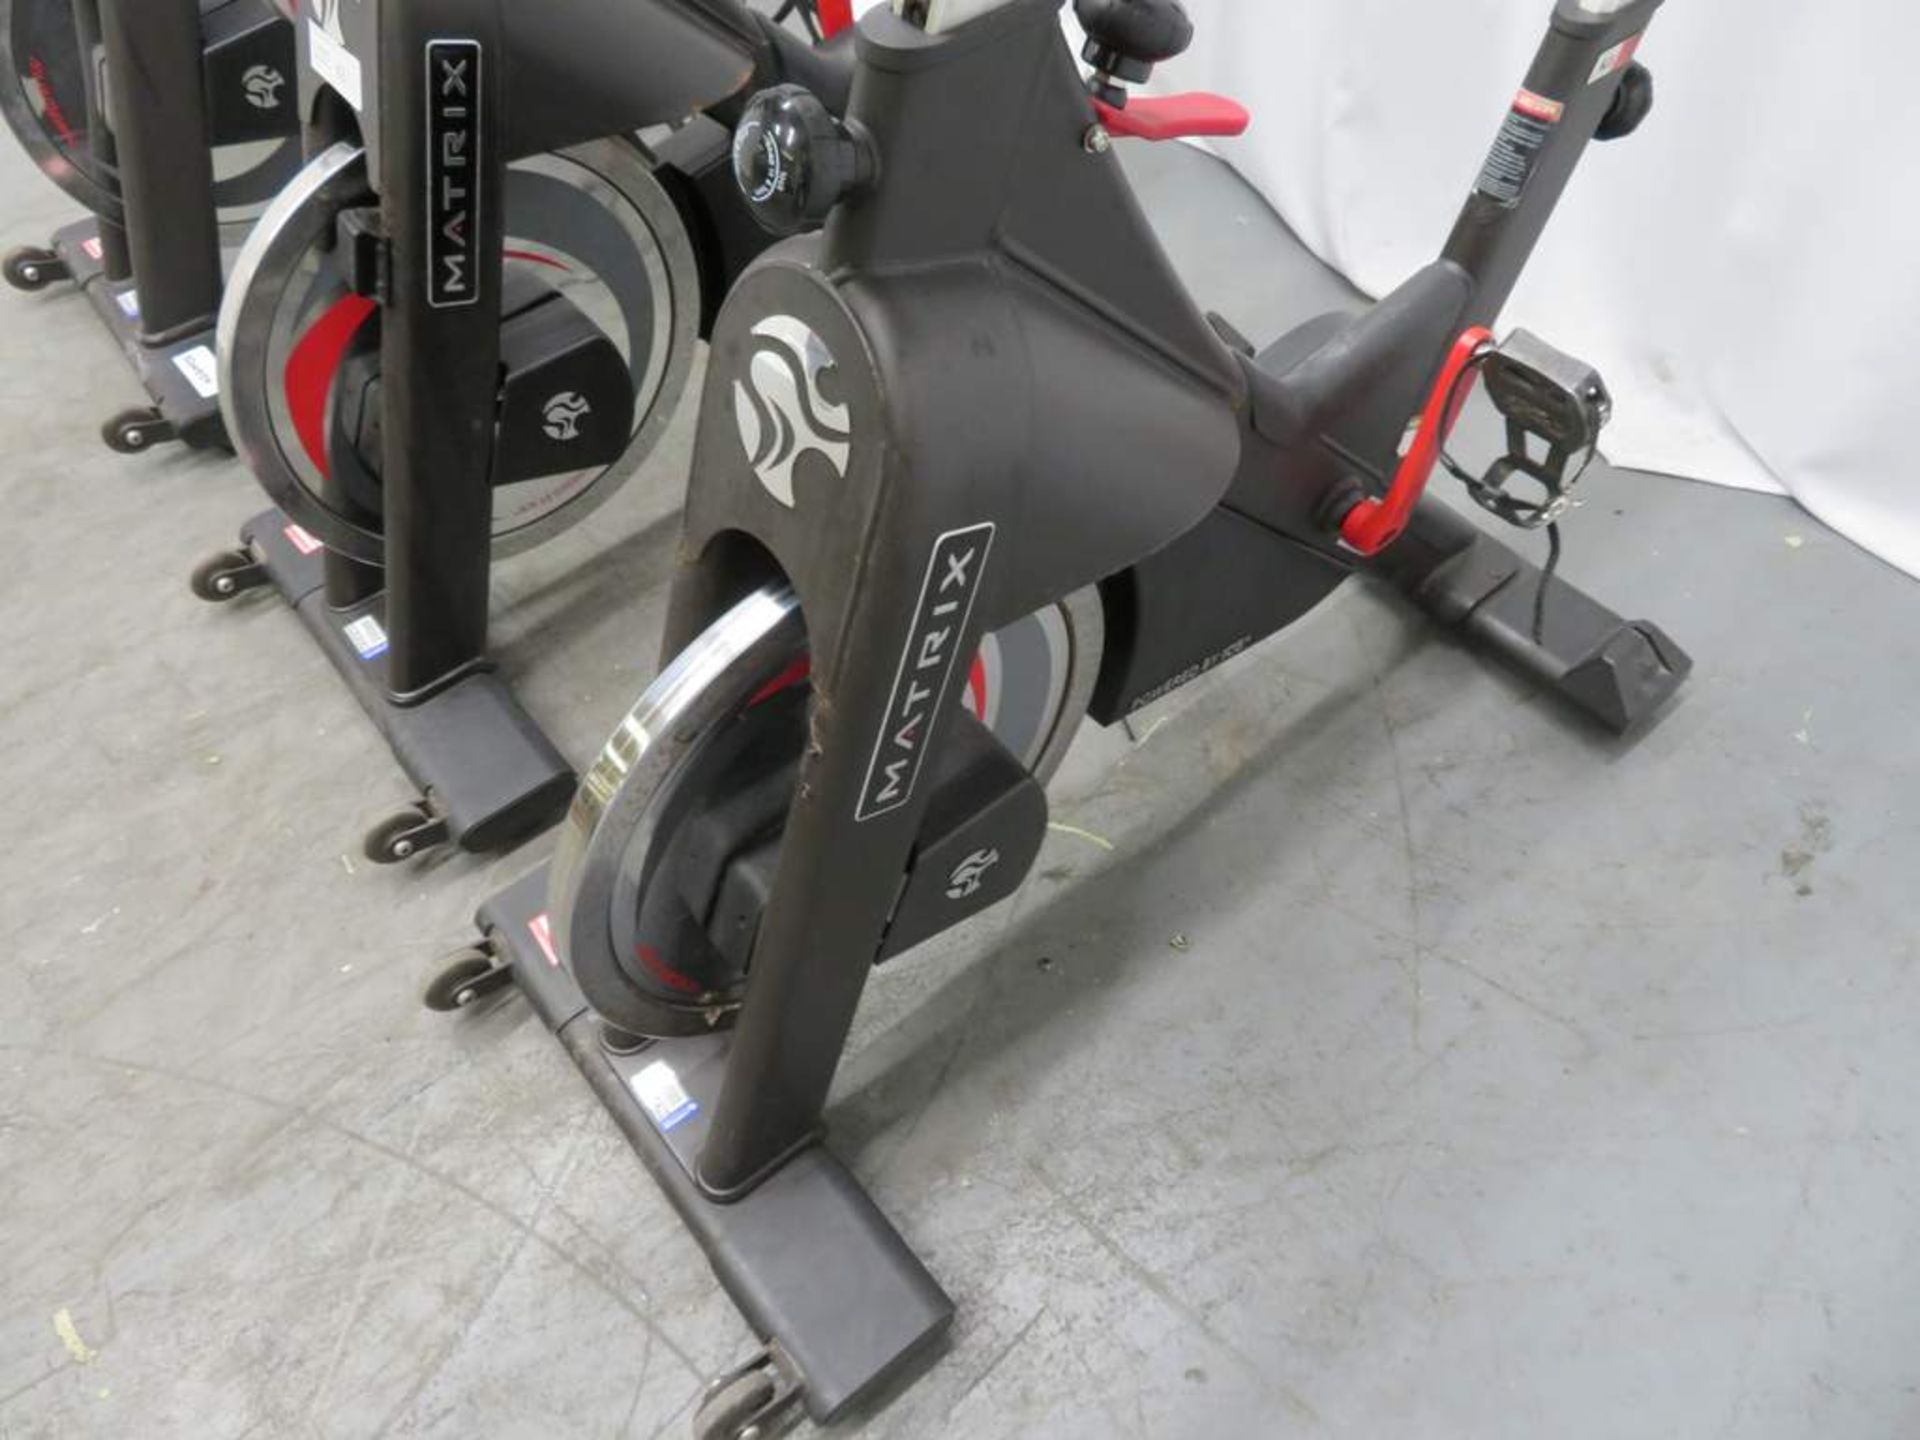 3x Matrix Model: IC3 Series Spin Bike, Complete With Digital Console. - Image 3 of 10